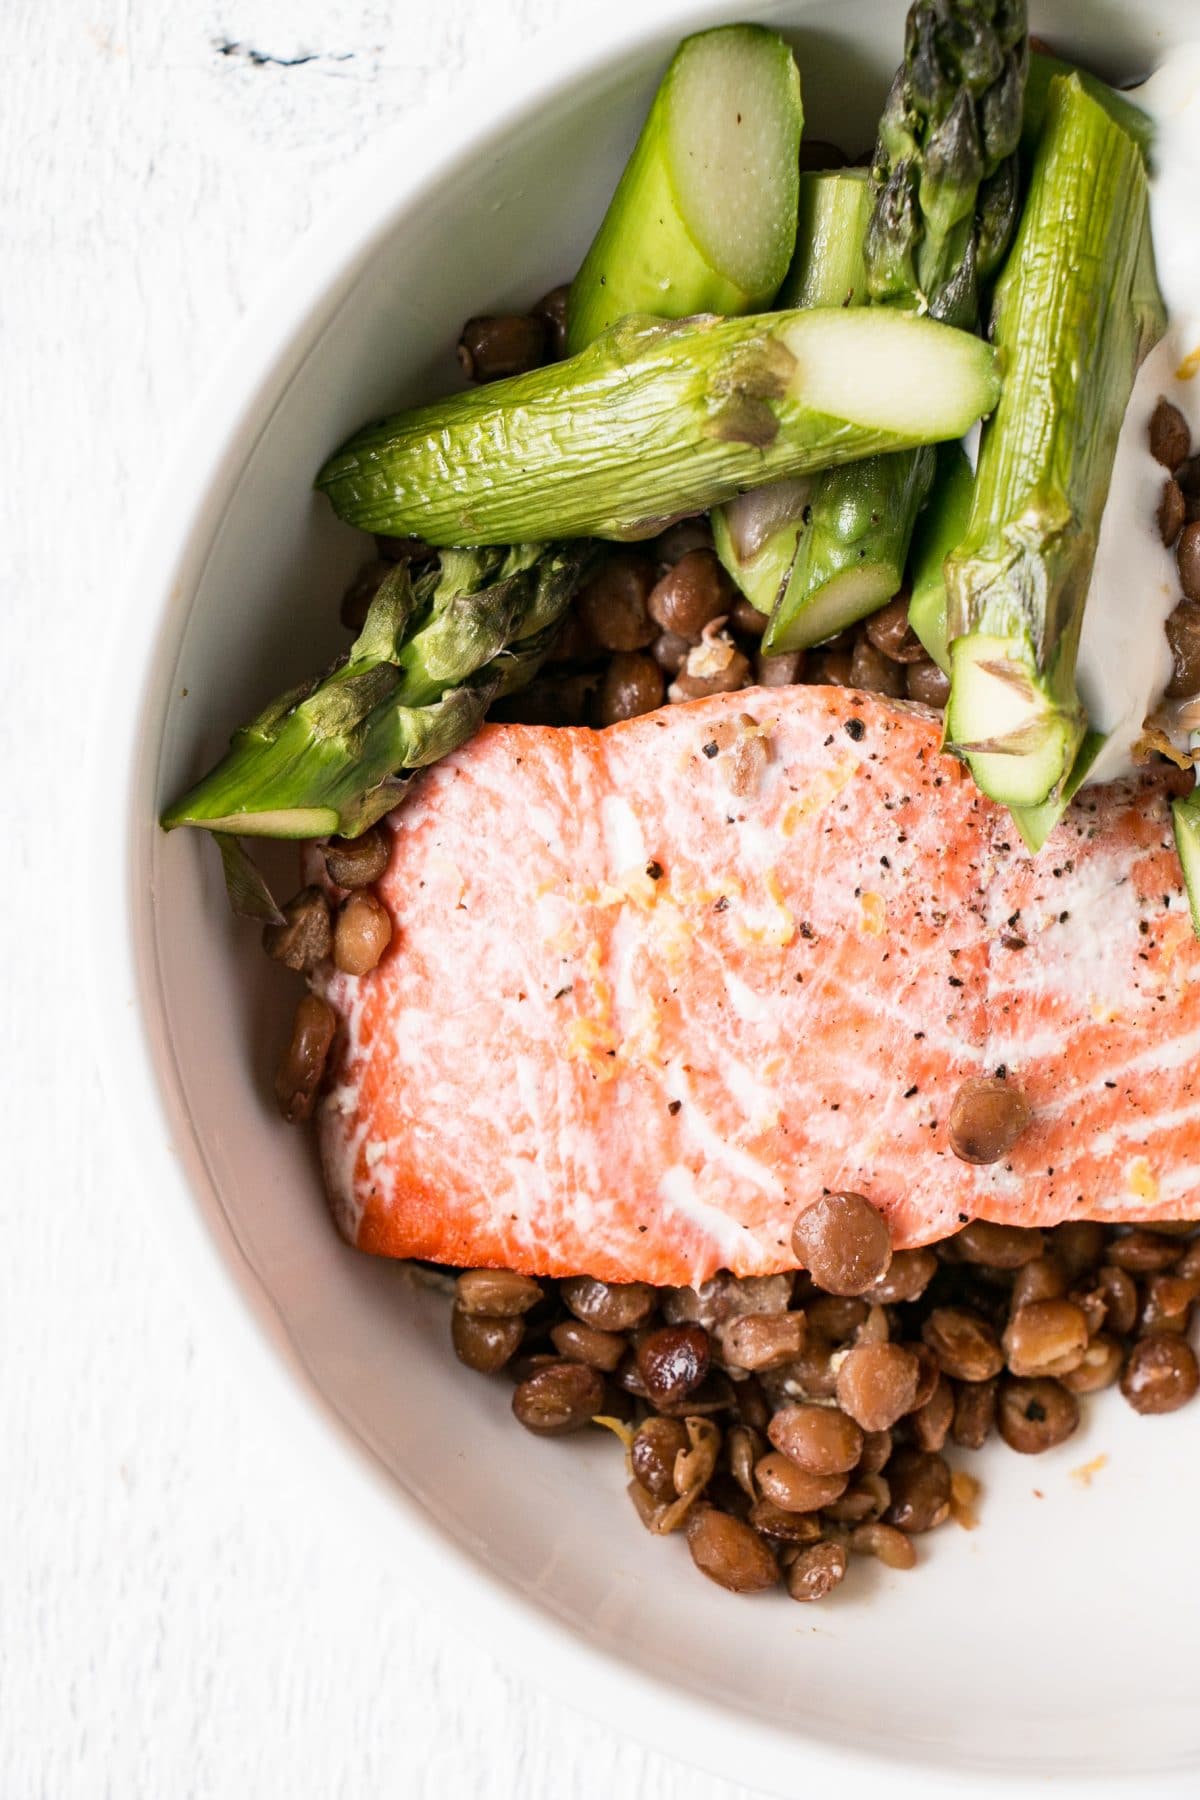 Healthy, quick, and beyond easy Sheet Pan Salmon, Lentils, and Asparagus. #LoveLentils #mealprep #healthy #GetPrepped #ad